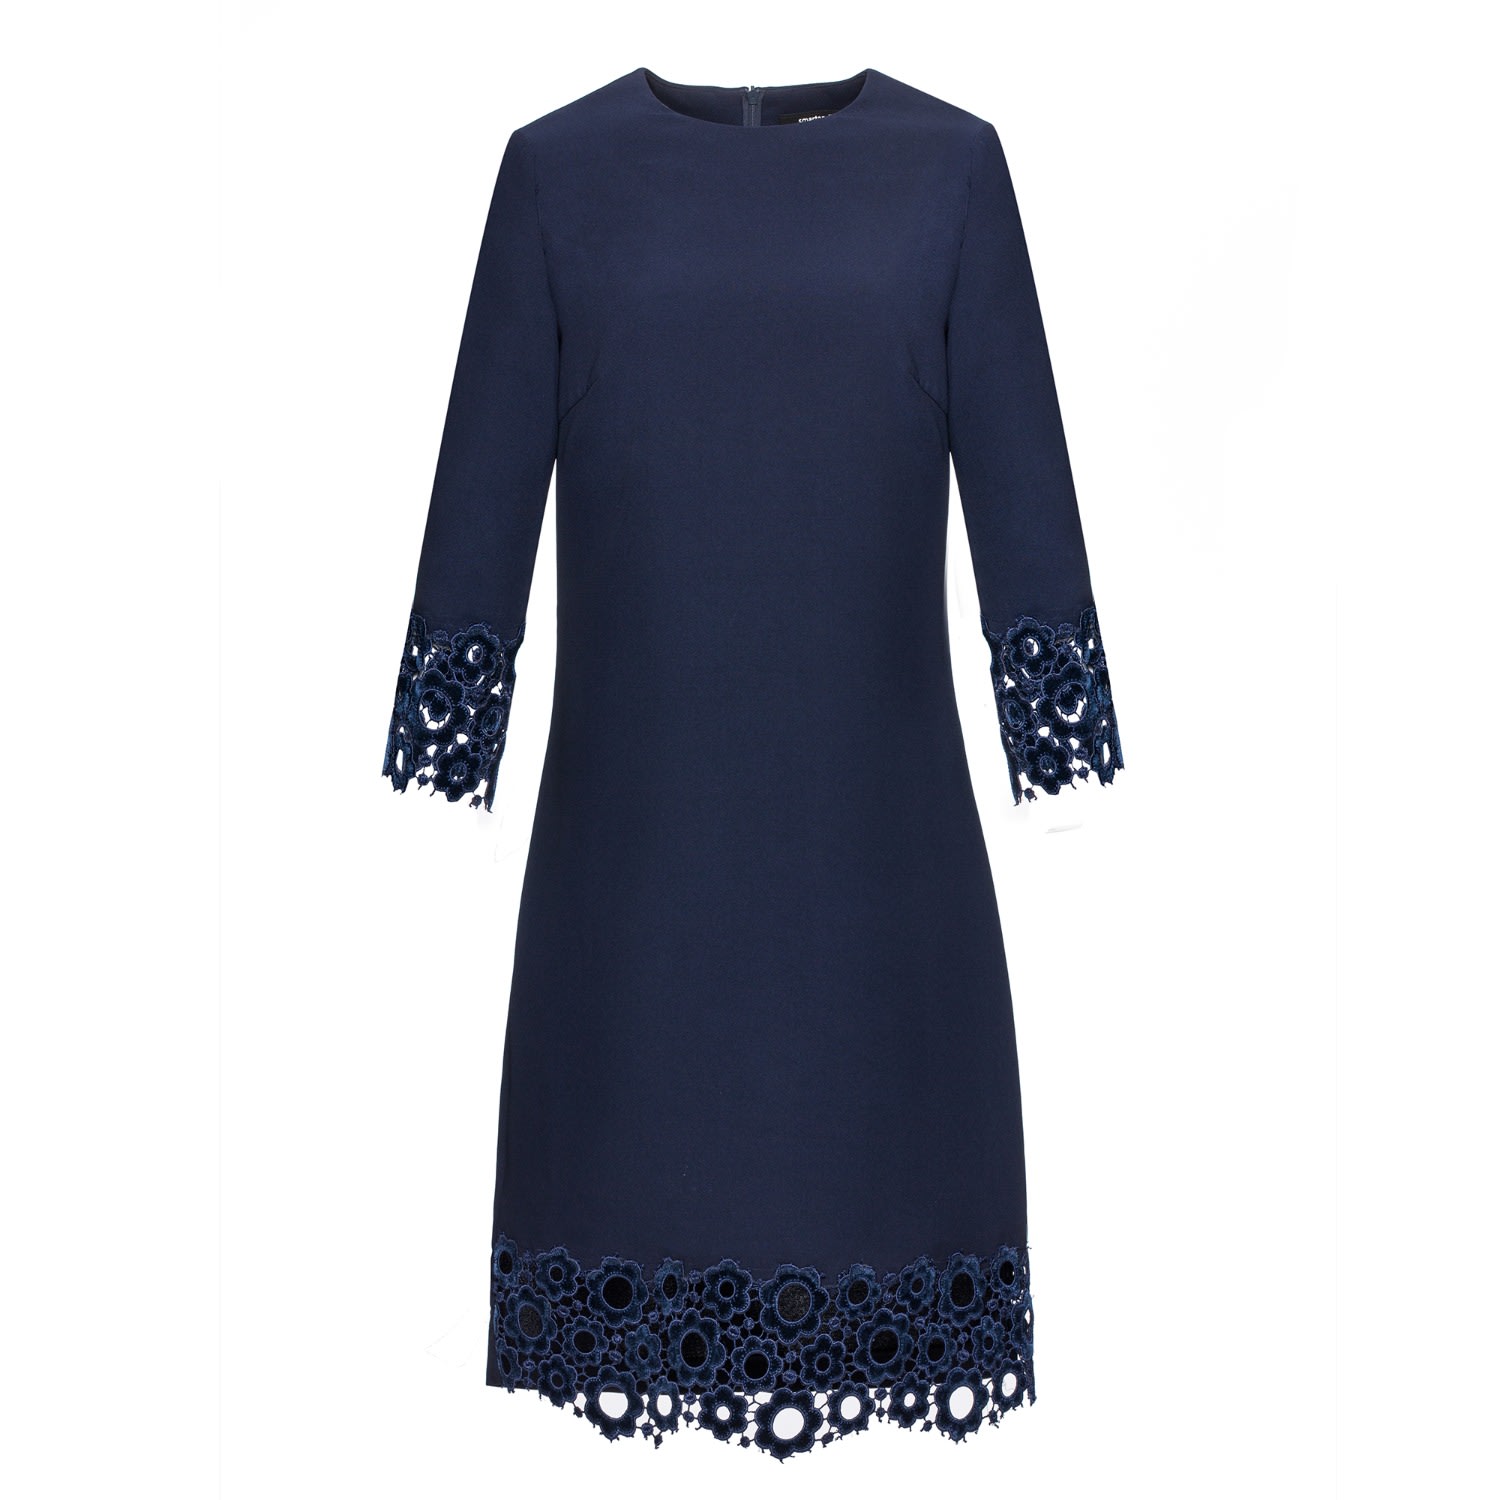 Women’s Blue Lace Trimmed Shift Dress Small Smart and Joy